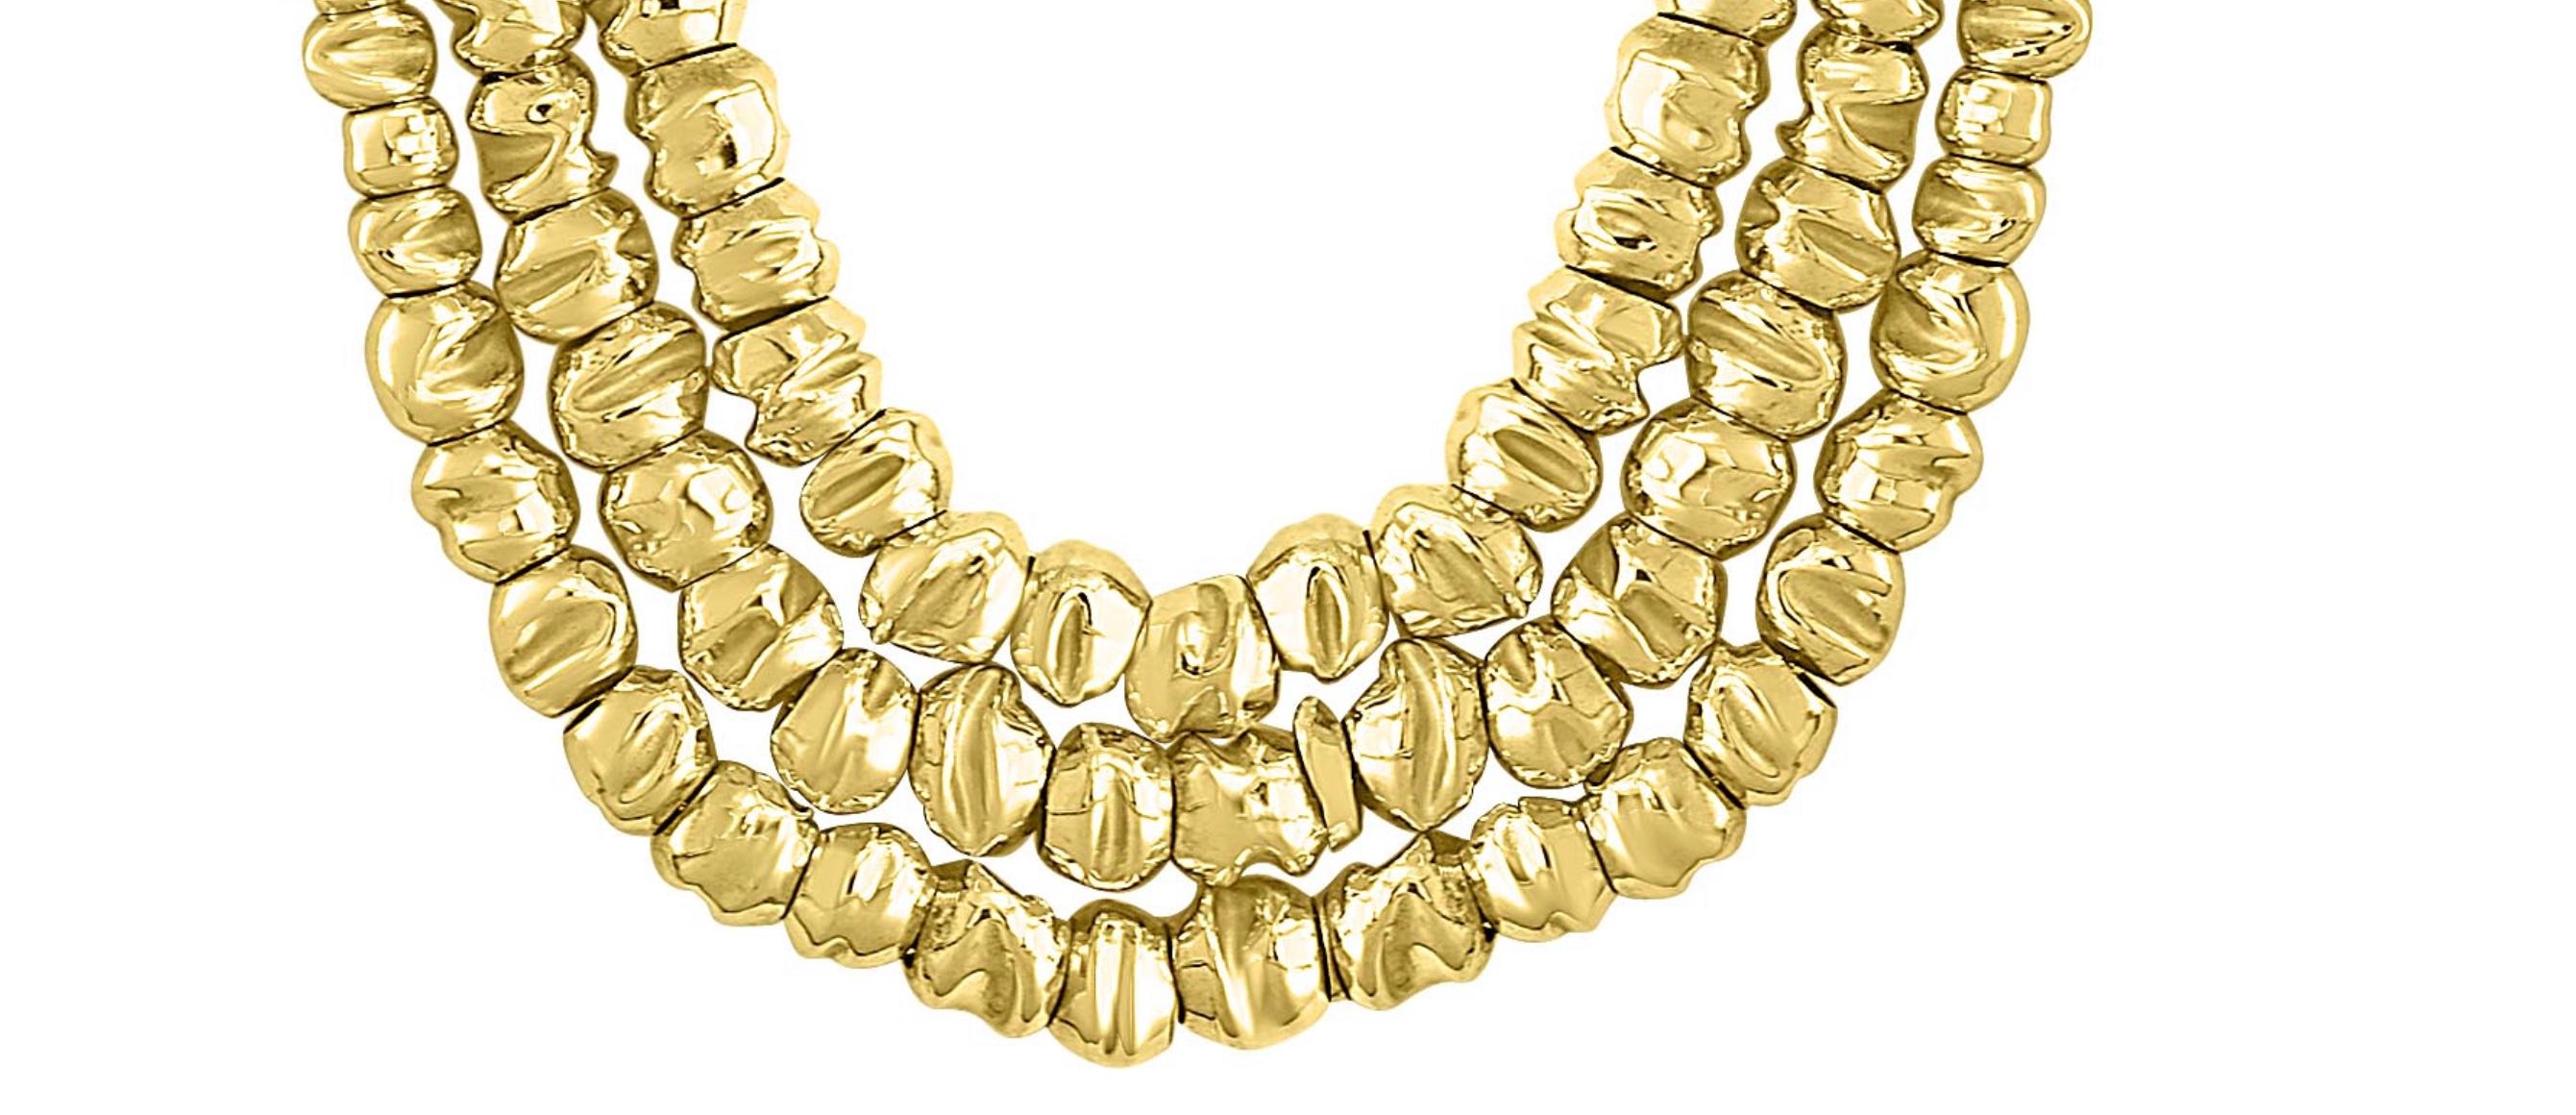 132 Gm 18 Karat  Yellow  Gold Designer  Orlando-Orlandini Necklace 18-22 Inches
One of our premium Neckalce  from our Bridal collection.
Three layers of Gold Necklace 
adjustable to 18-22 inches
Weight of the necklace is 132 Grams grams. 
Extremely